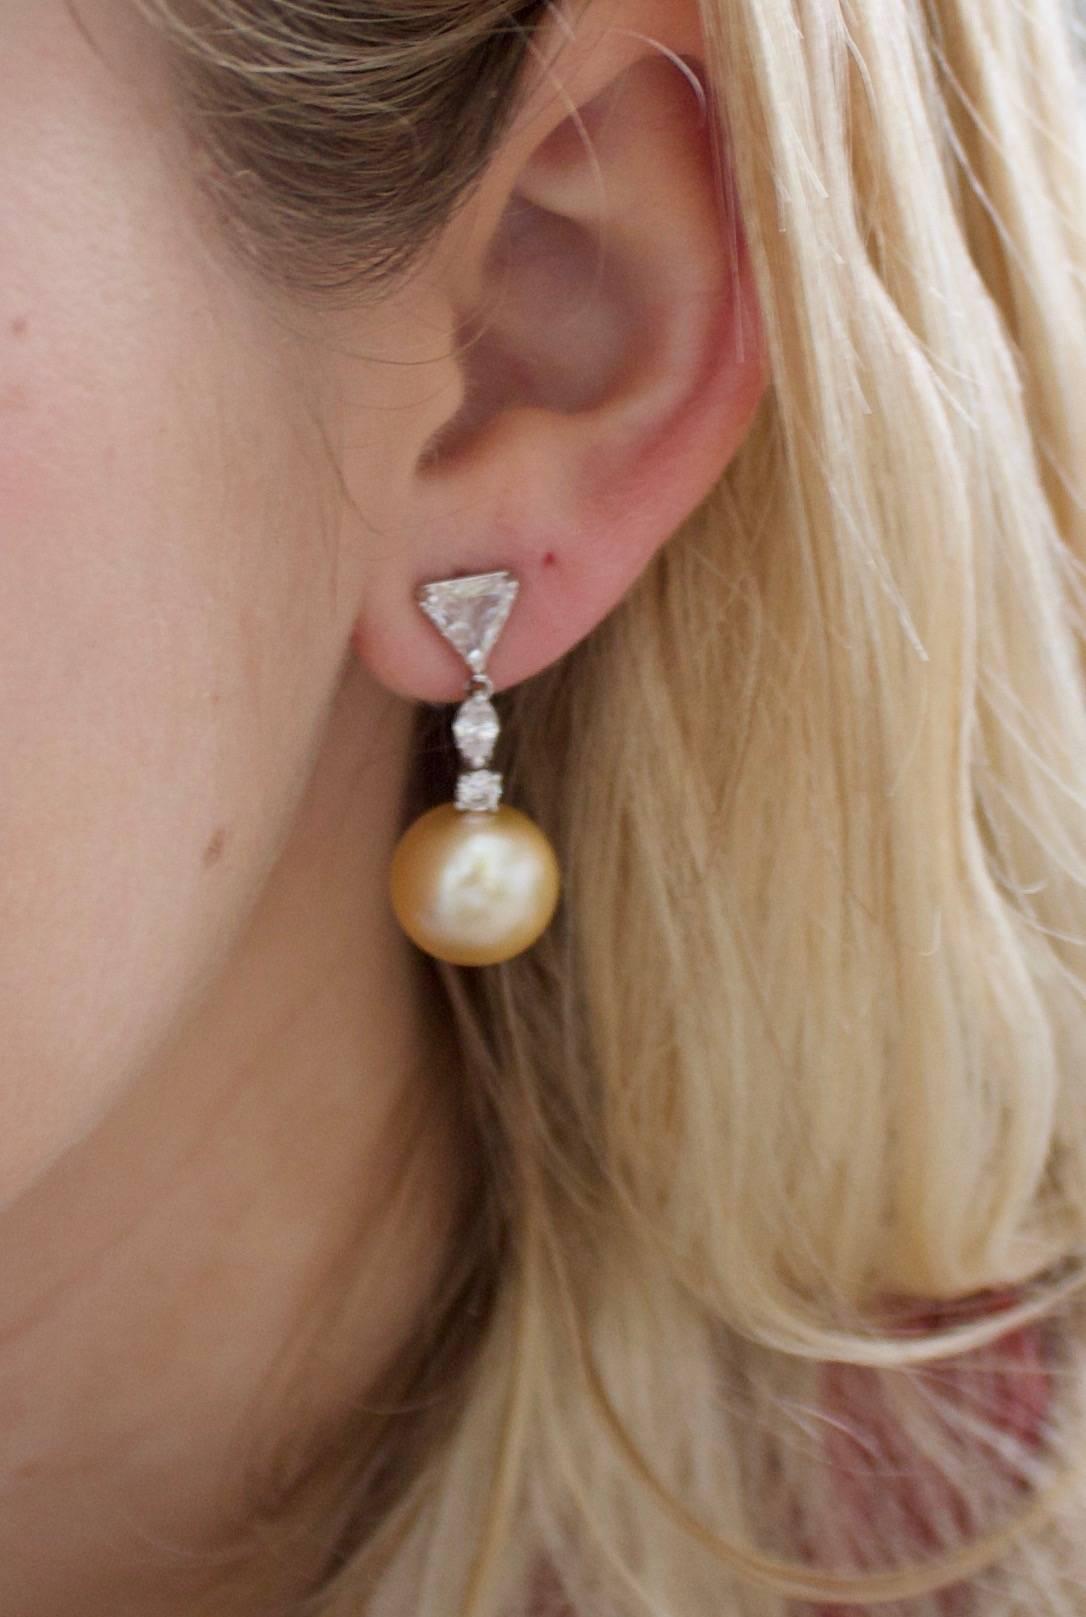 Golden South Sea Pearl and Diamond Earrings in 18k Gold
Two Golden South Sea Pearls 13 mm
Two Triangle Cut Diamonds weighing 2.02 carats
Two Round Brilliant Cut Diamonds weighing .30 carats
Two marquise Cut Diamonds weighing .50 carats